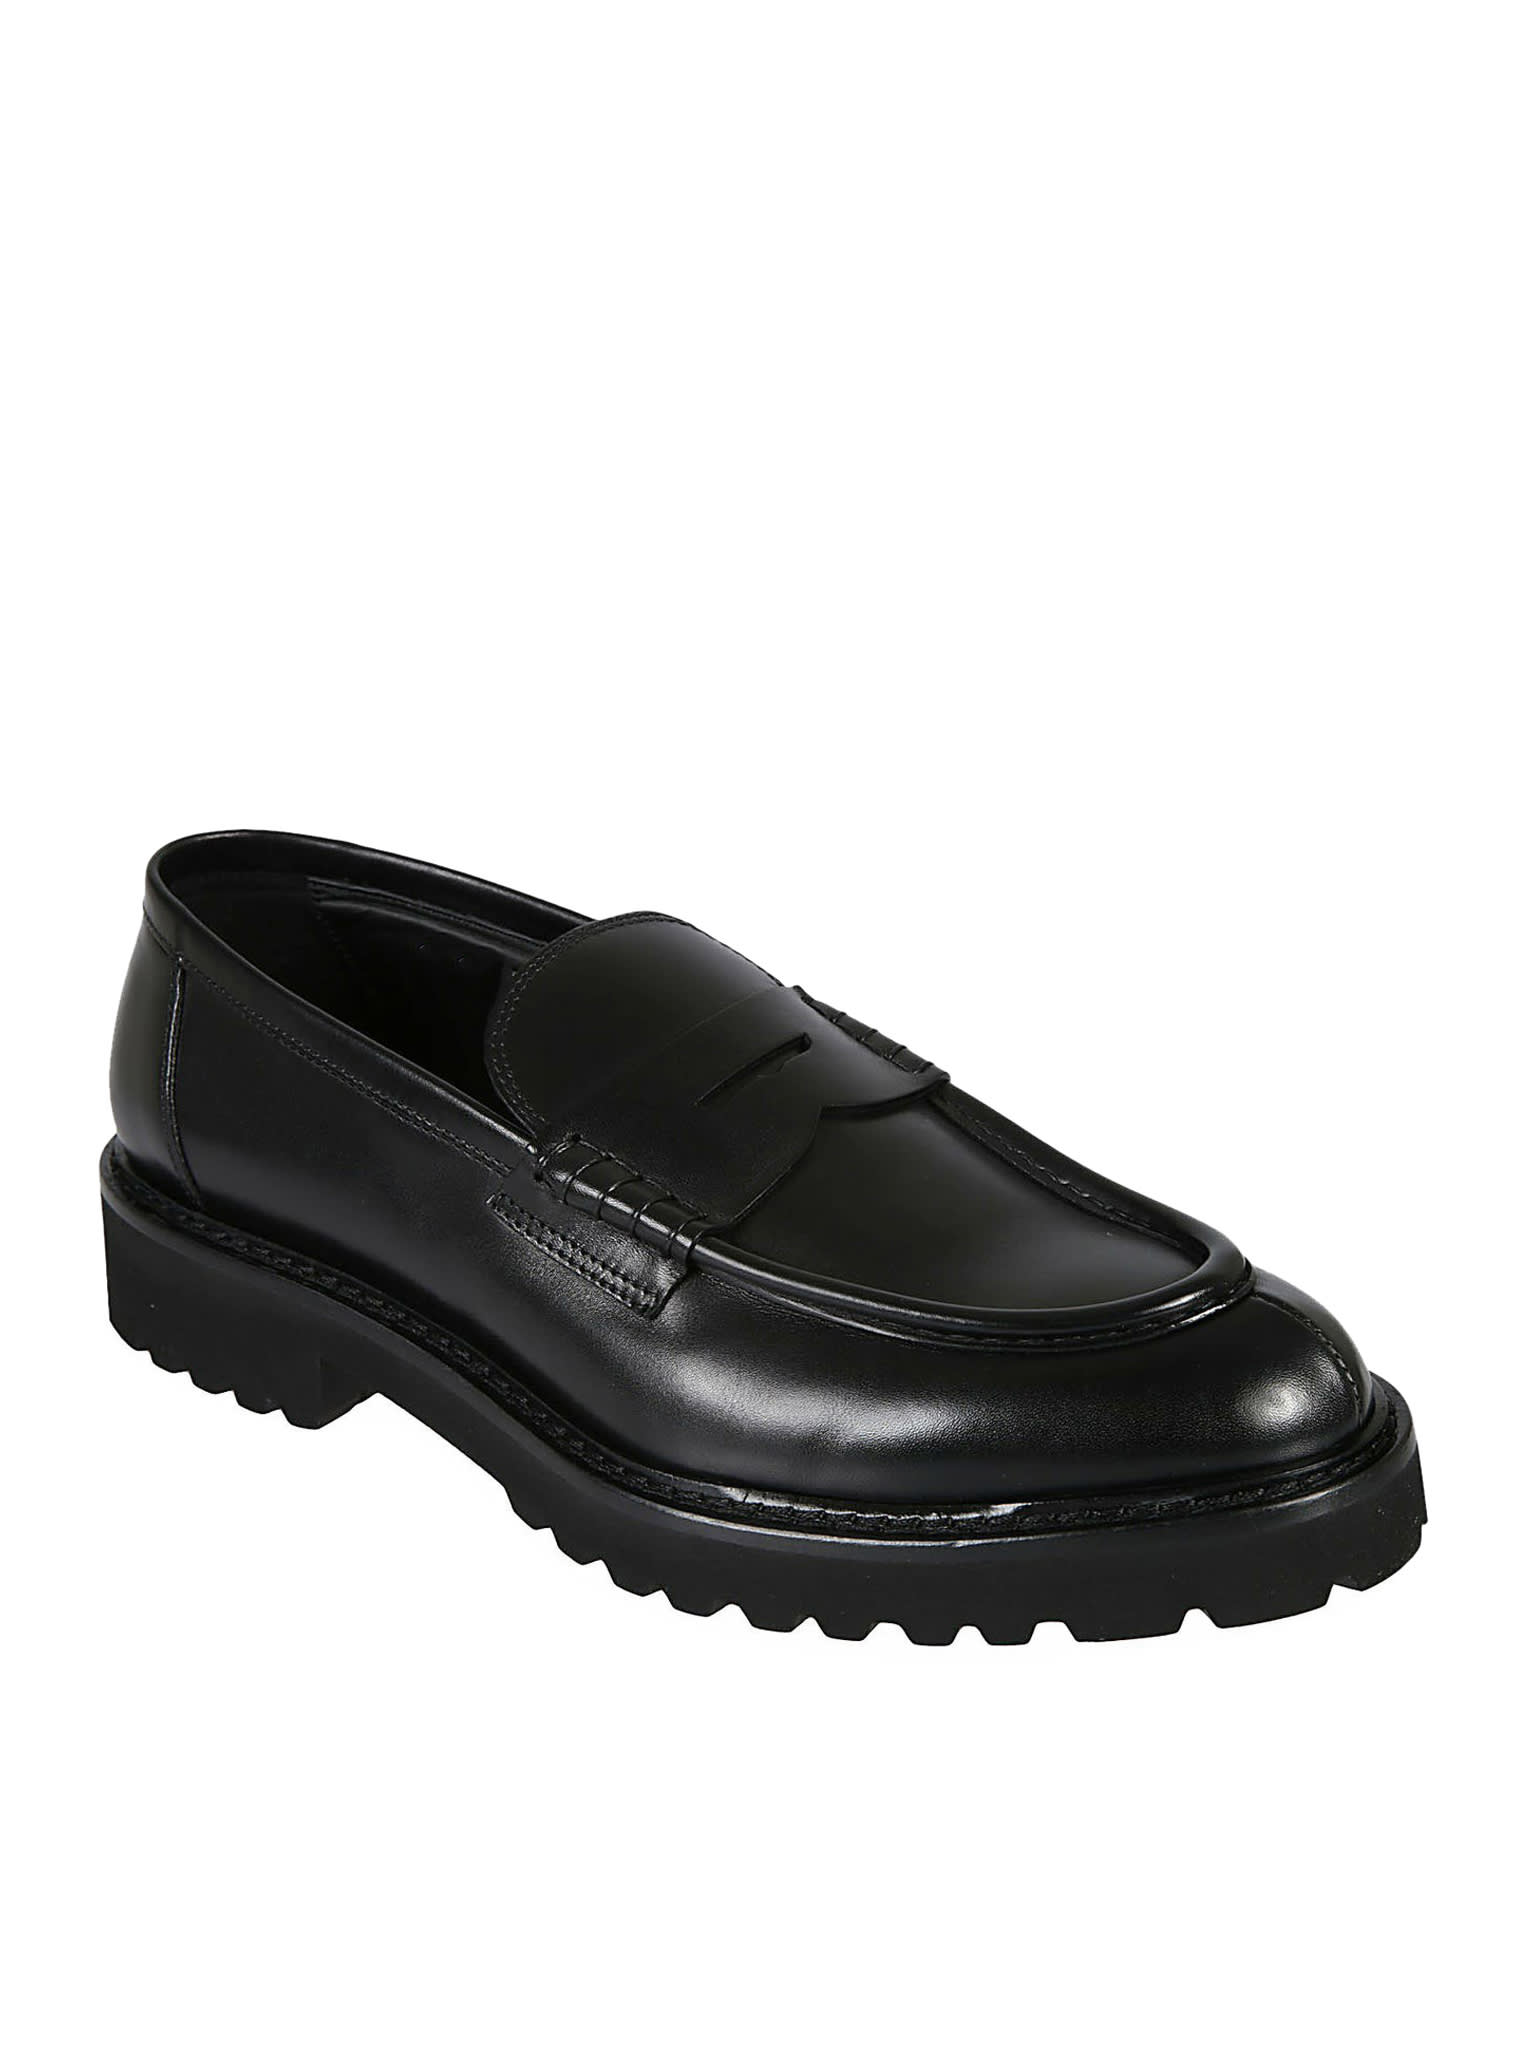 Doucal's Deco Loafer